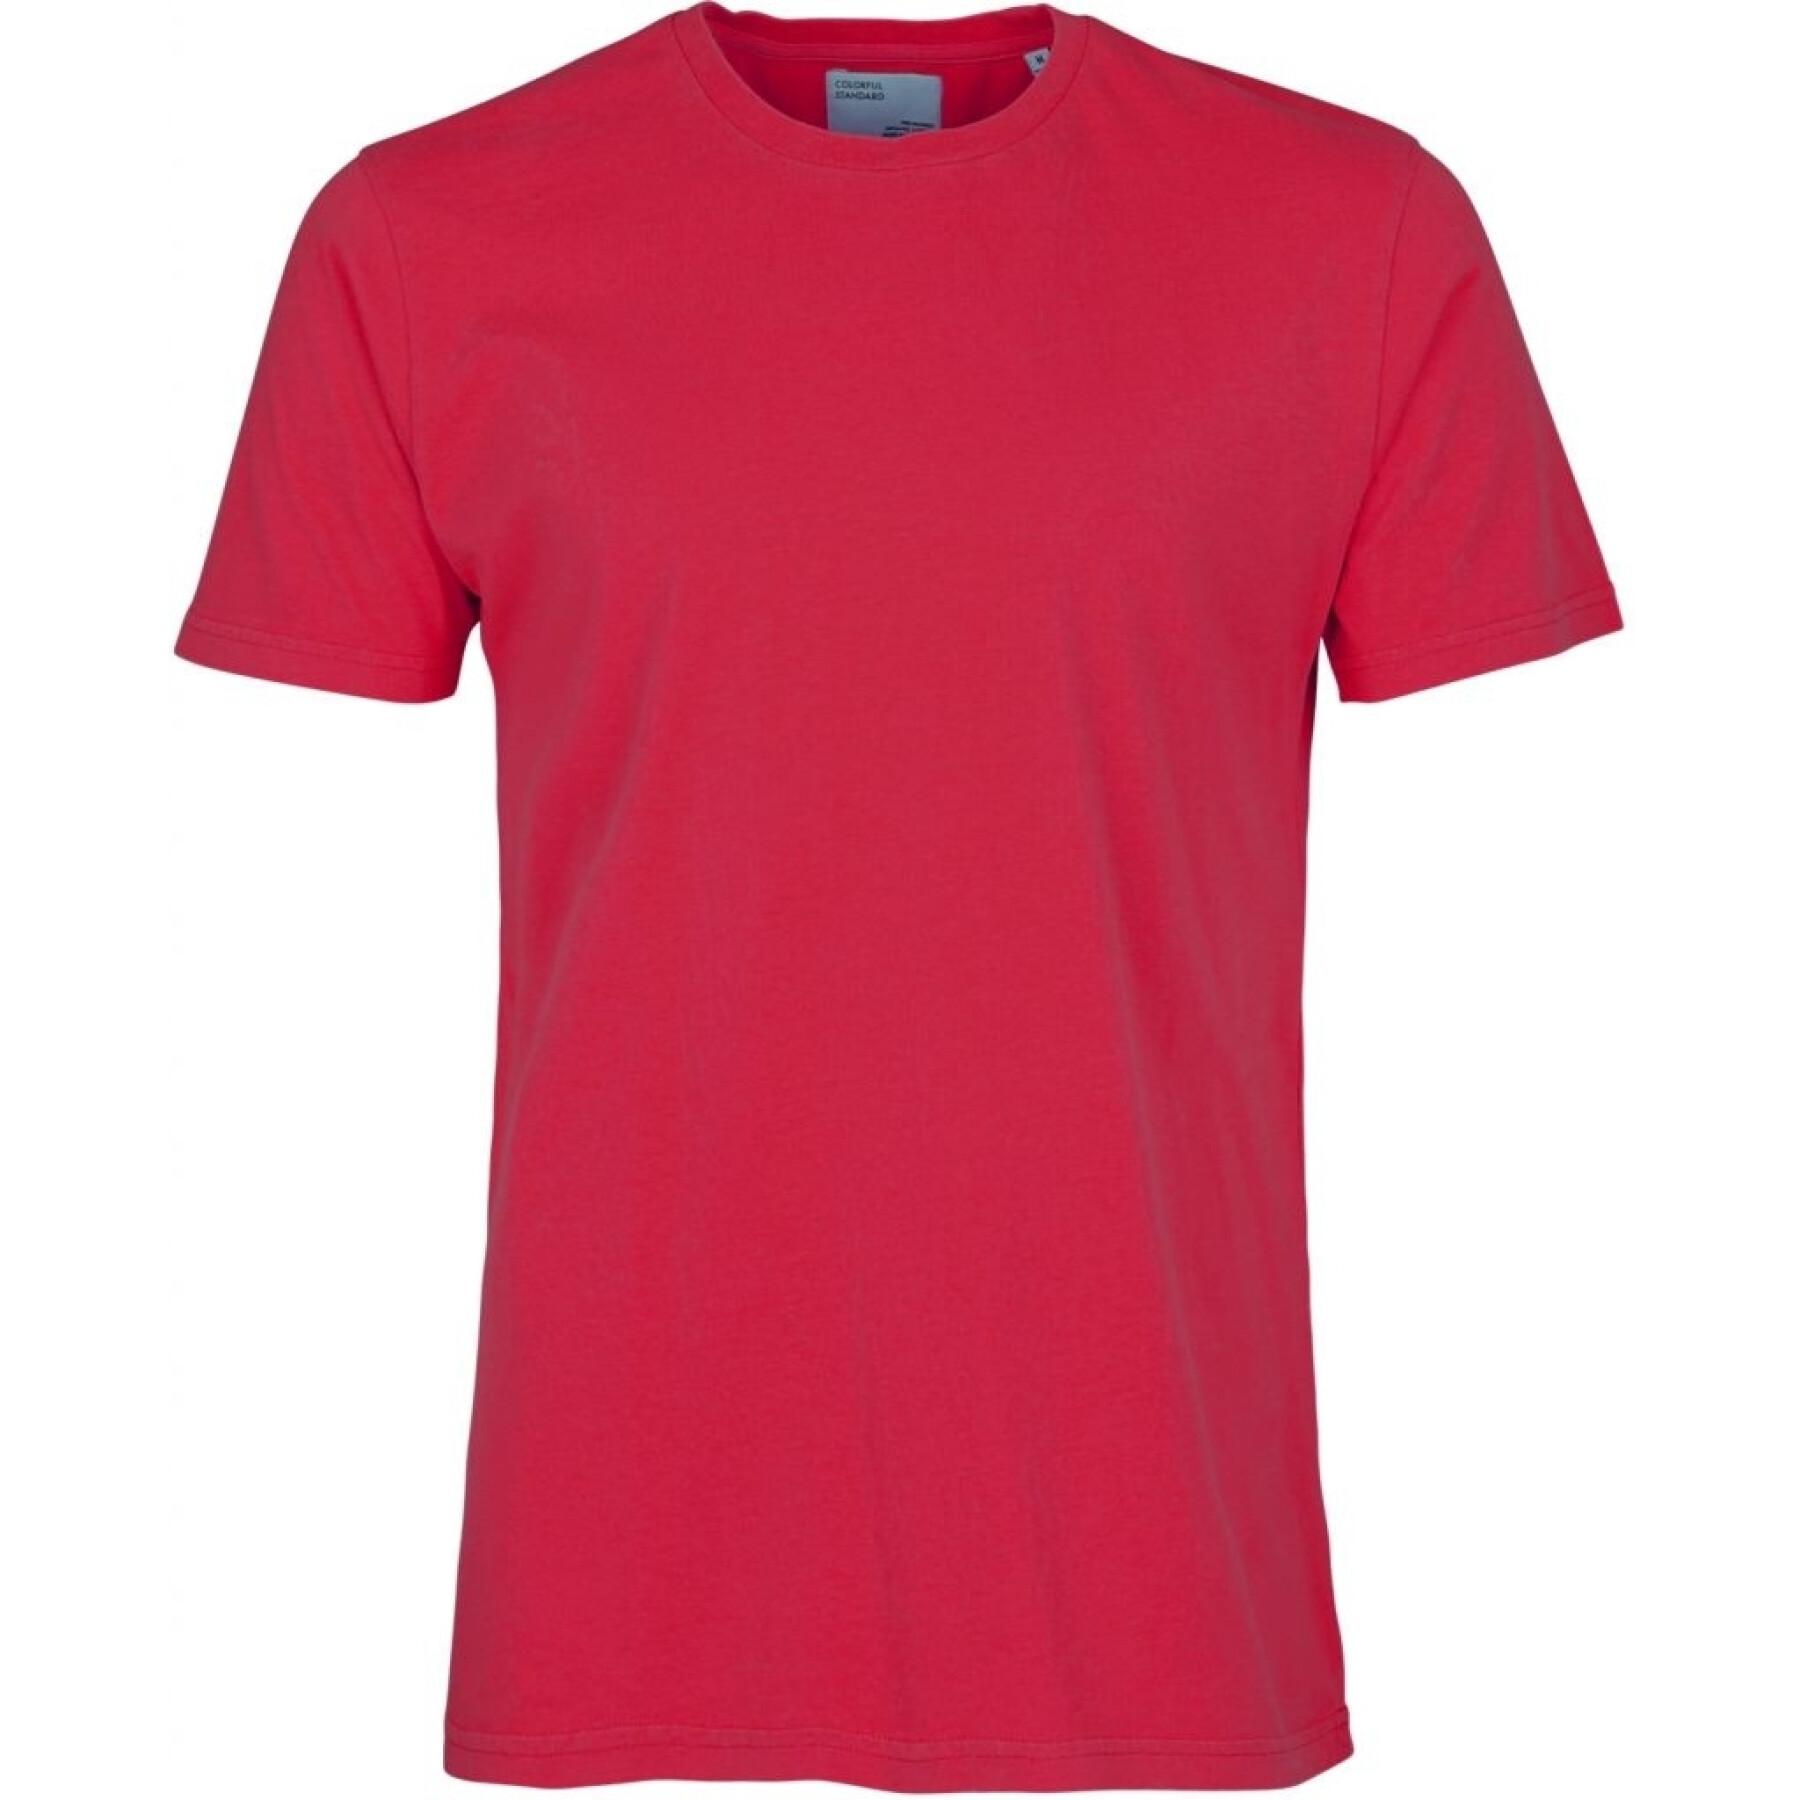 Camiseta Colorful Standard Classic Organic scarlet red